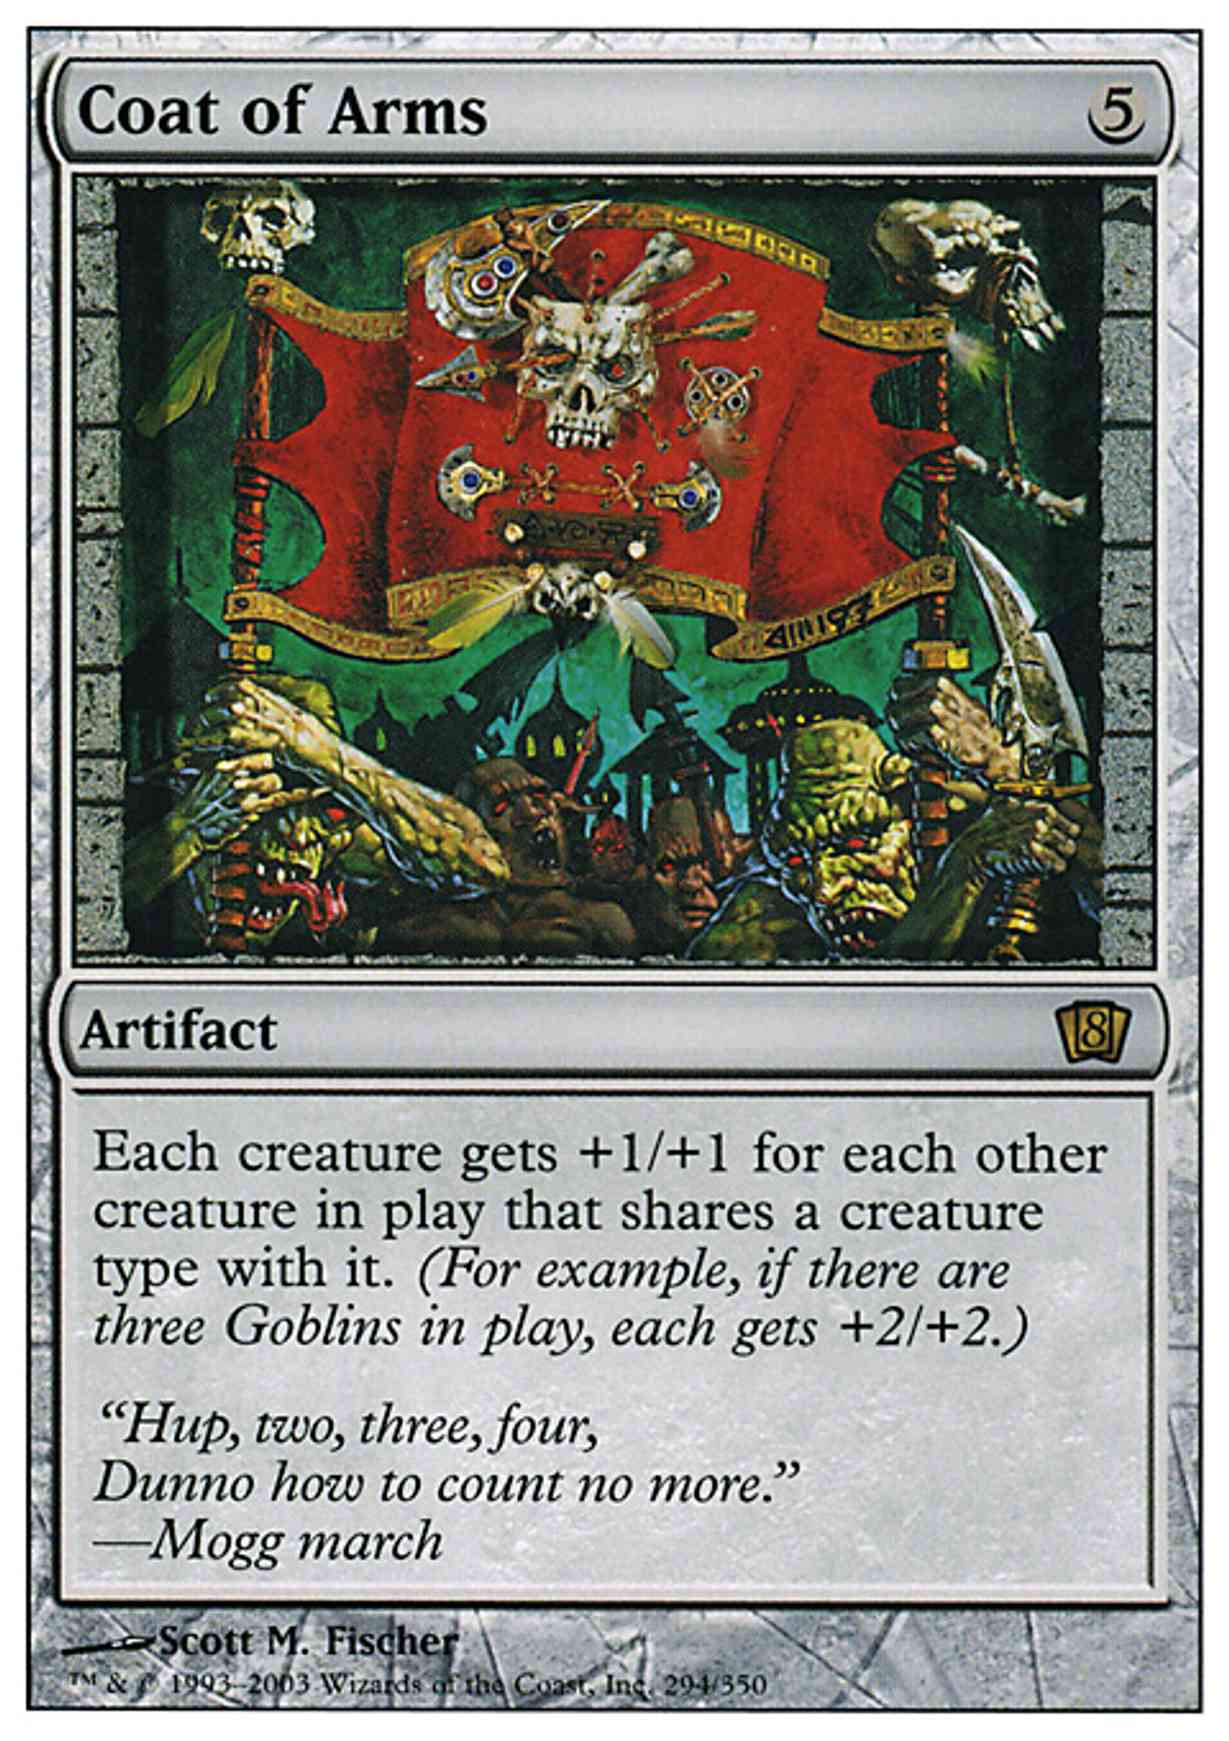 Coat of Arms magic card front